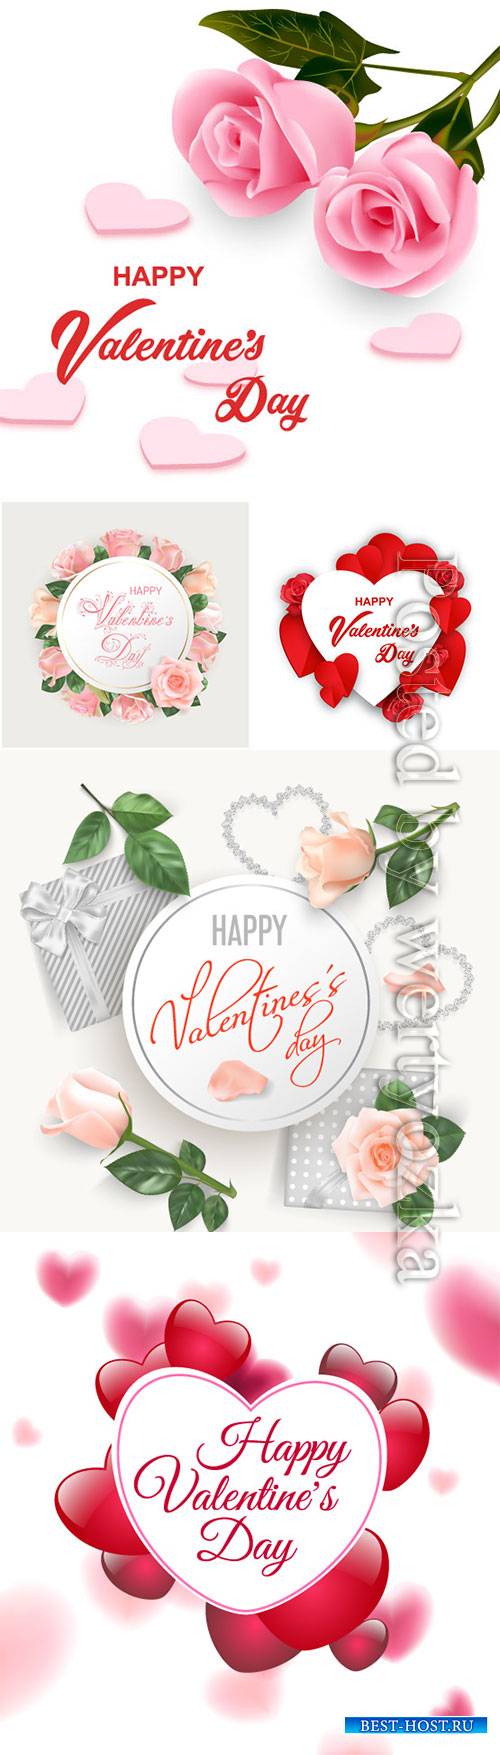 Happy Valentine's Day, vector hearts of couples in love # 20